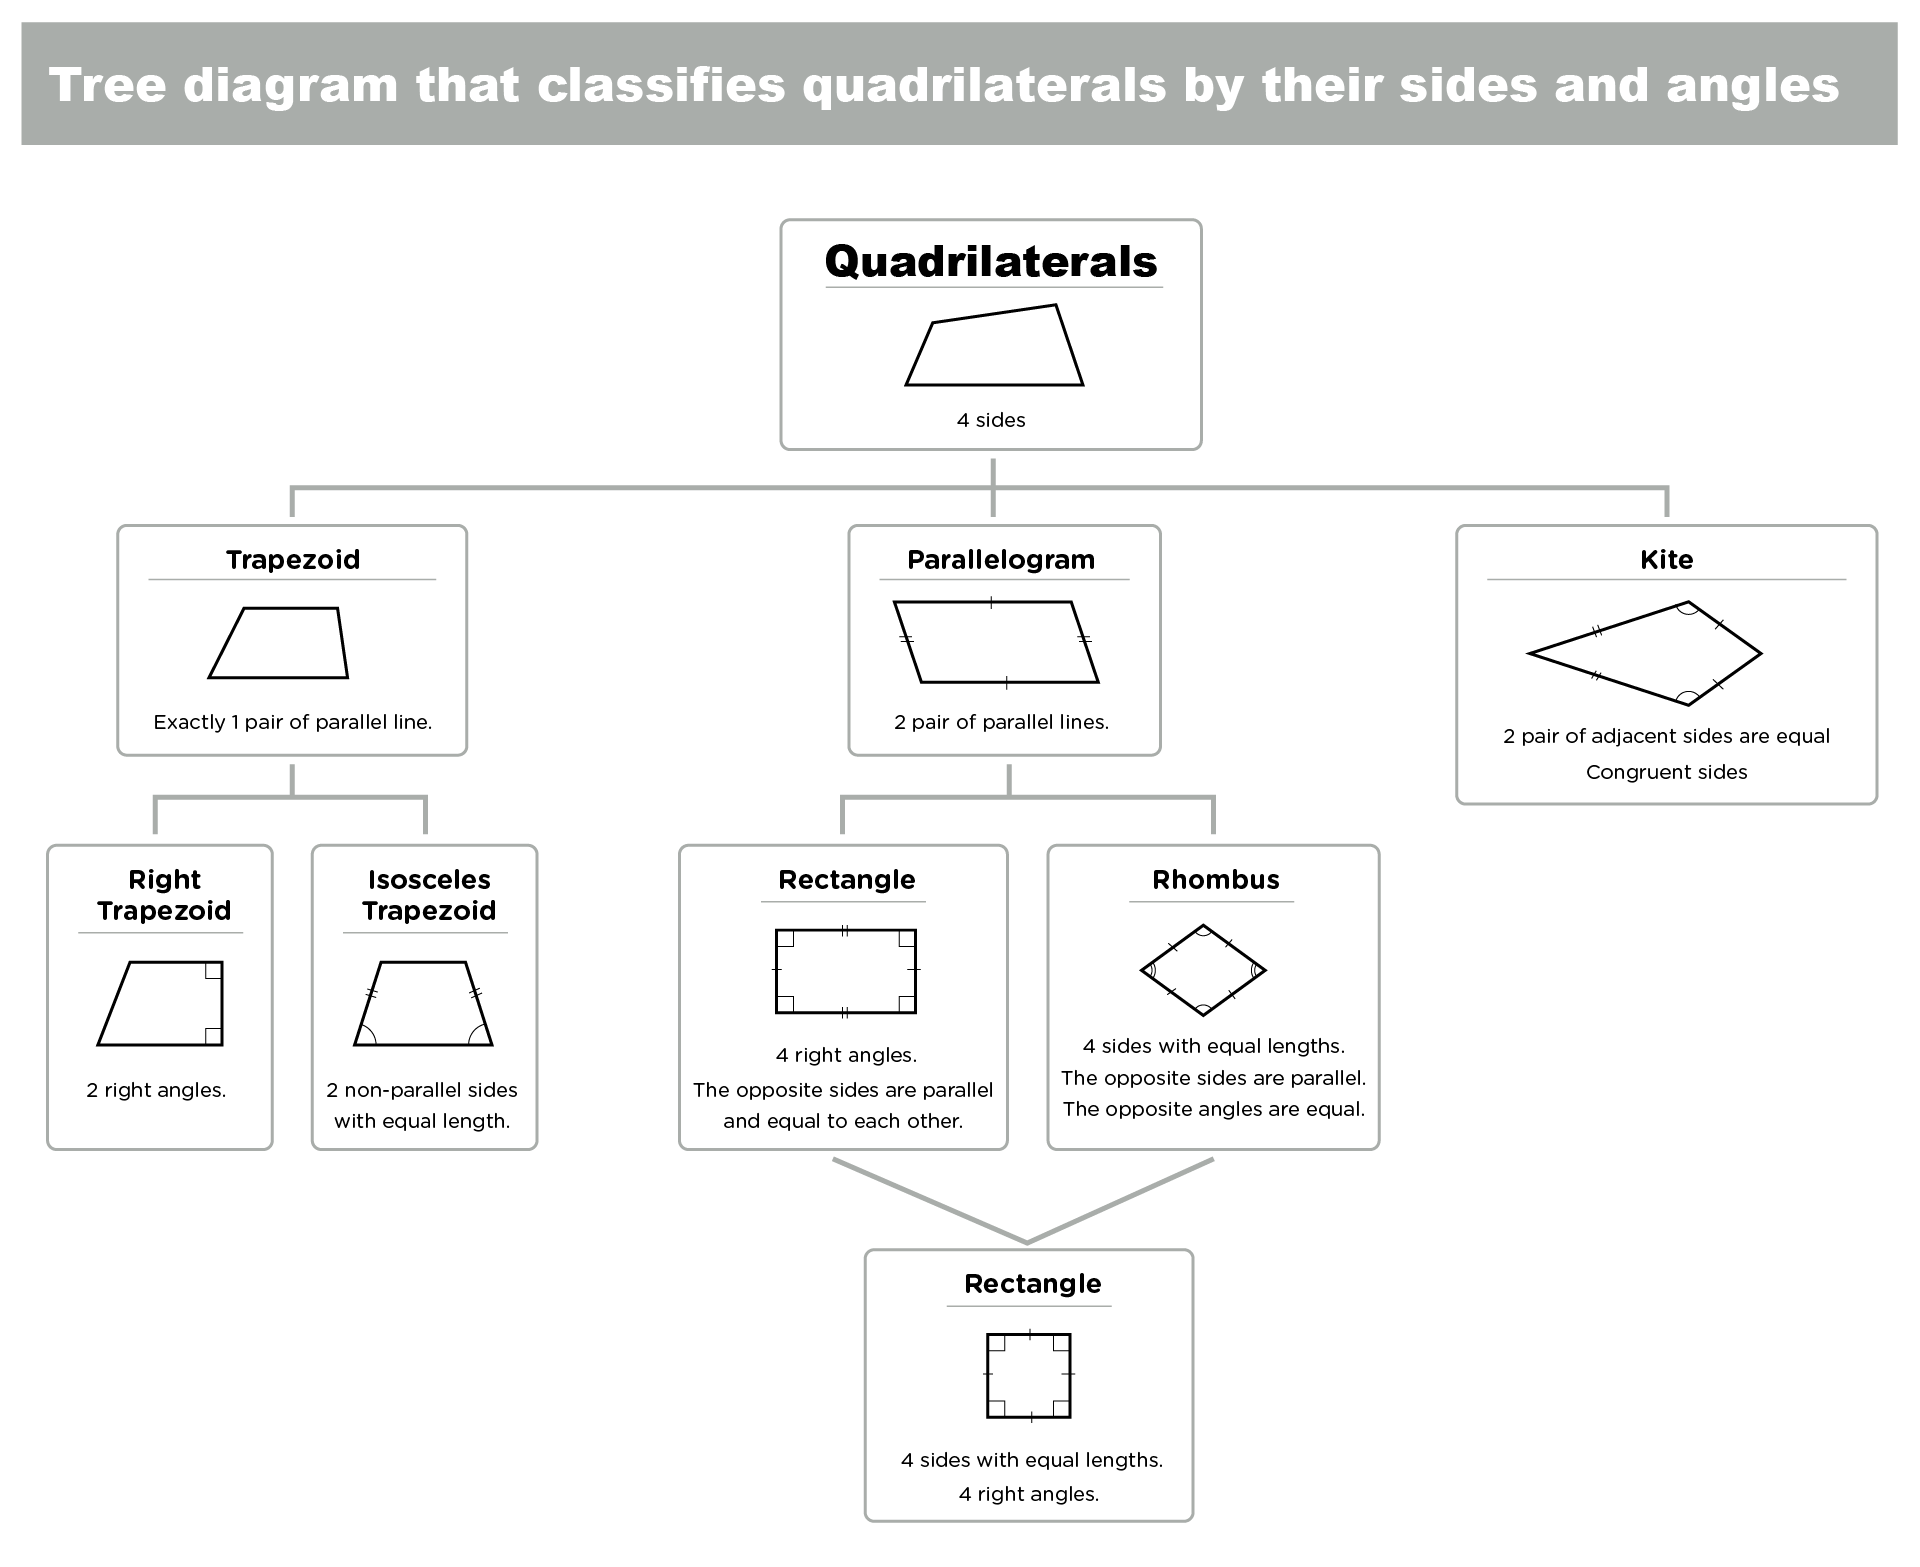 image of a tree diagram that classifies quadrilaterals by their sides and angles